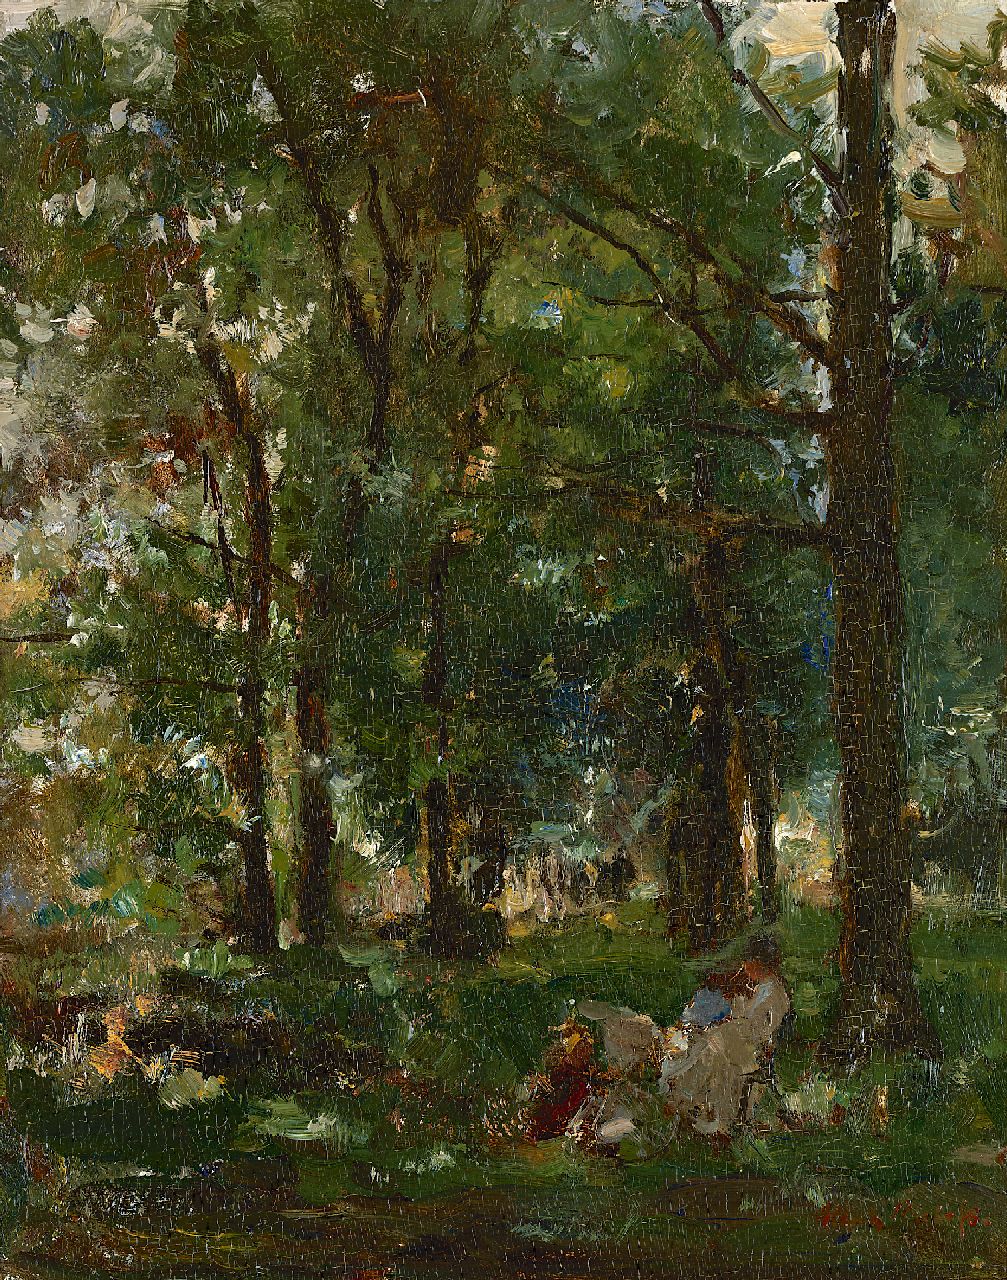 Roelofs O.W.A.  | Otto Willem Albertus 'Albert' Roelofs | Paintings offered for sale | In the park, oil on panel 39.5 x 31.8 cm, signed l.r.